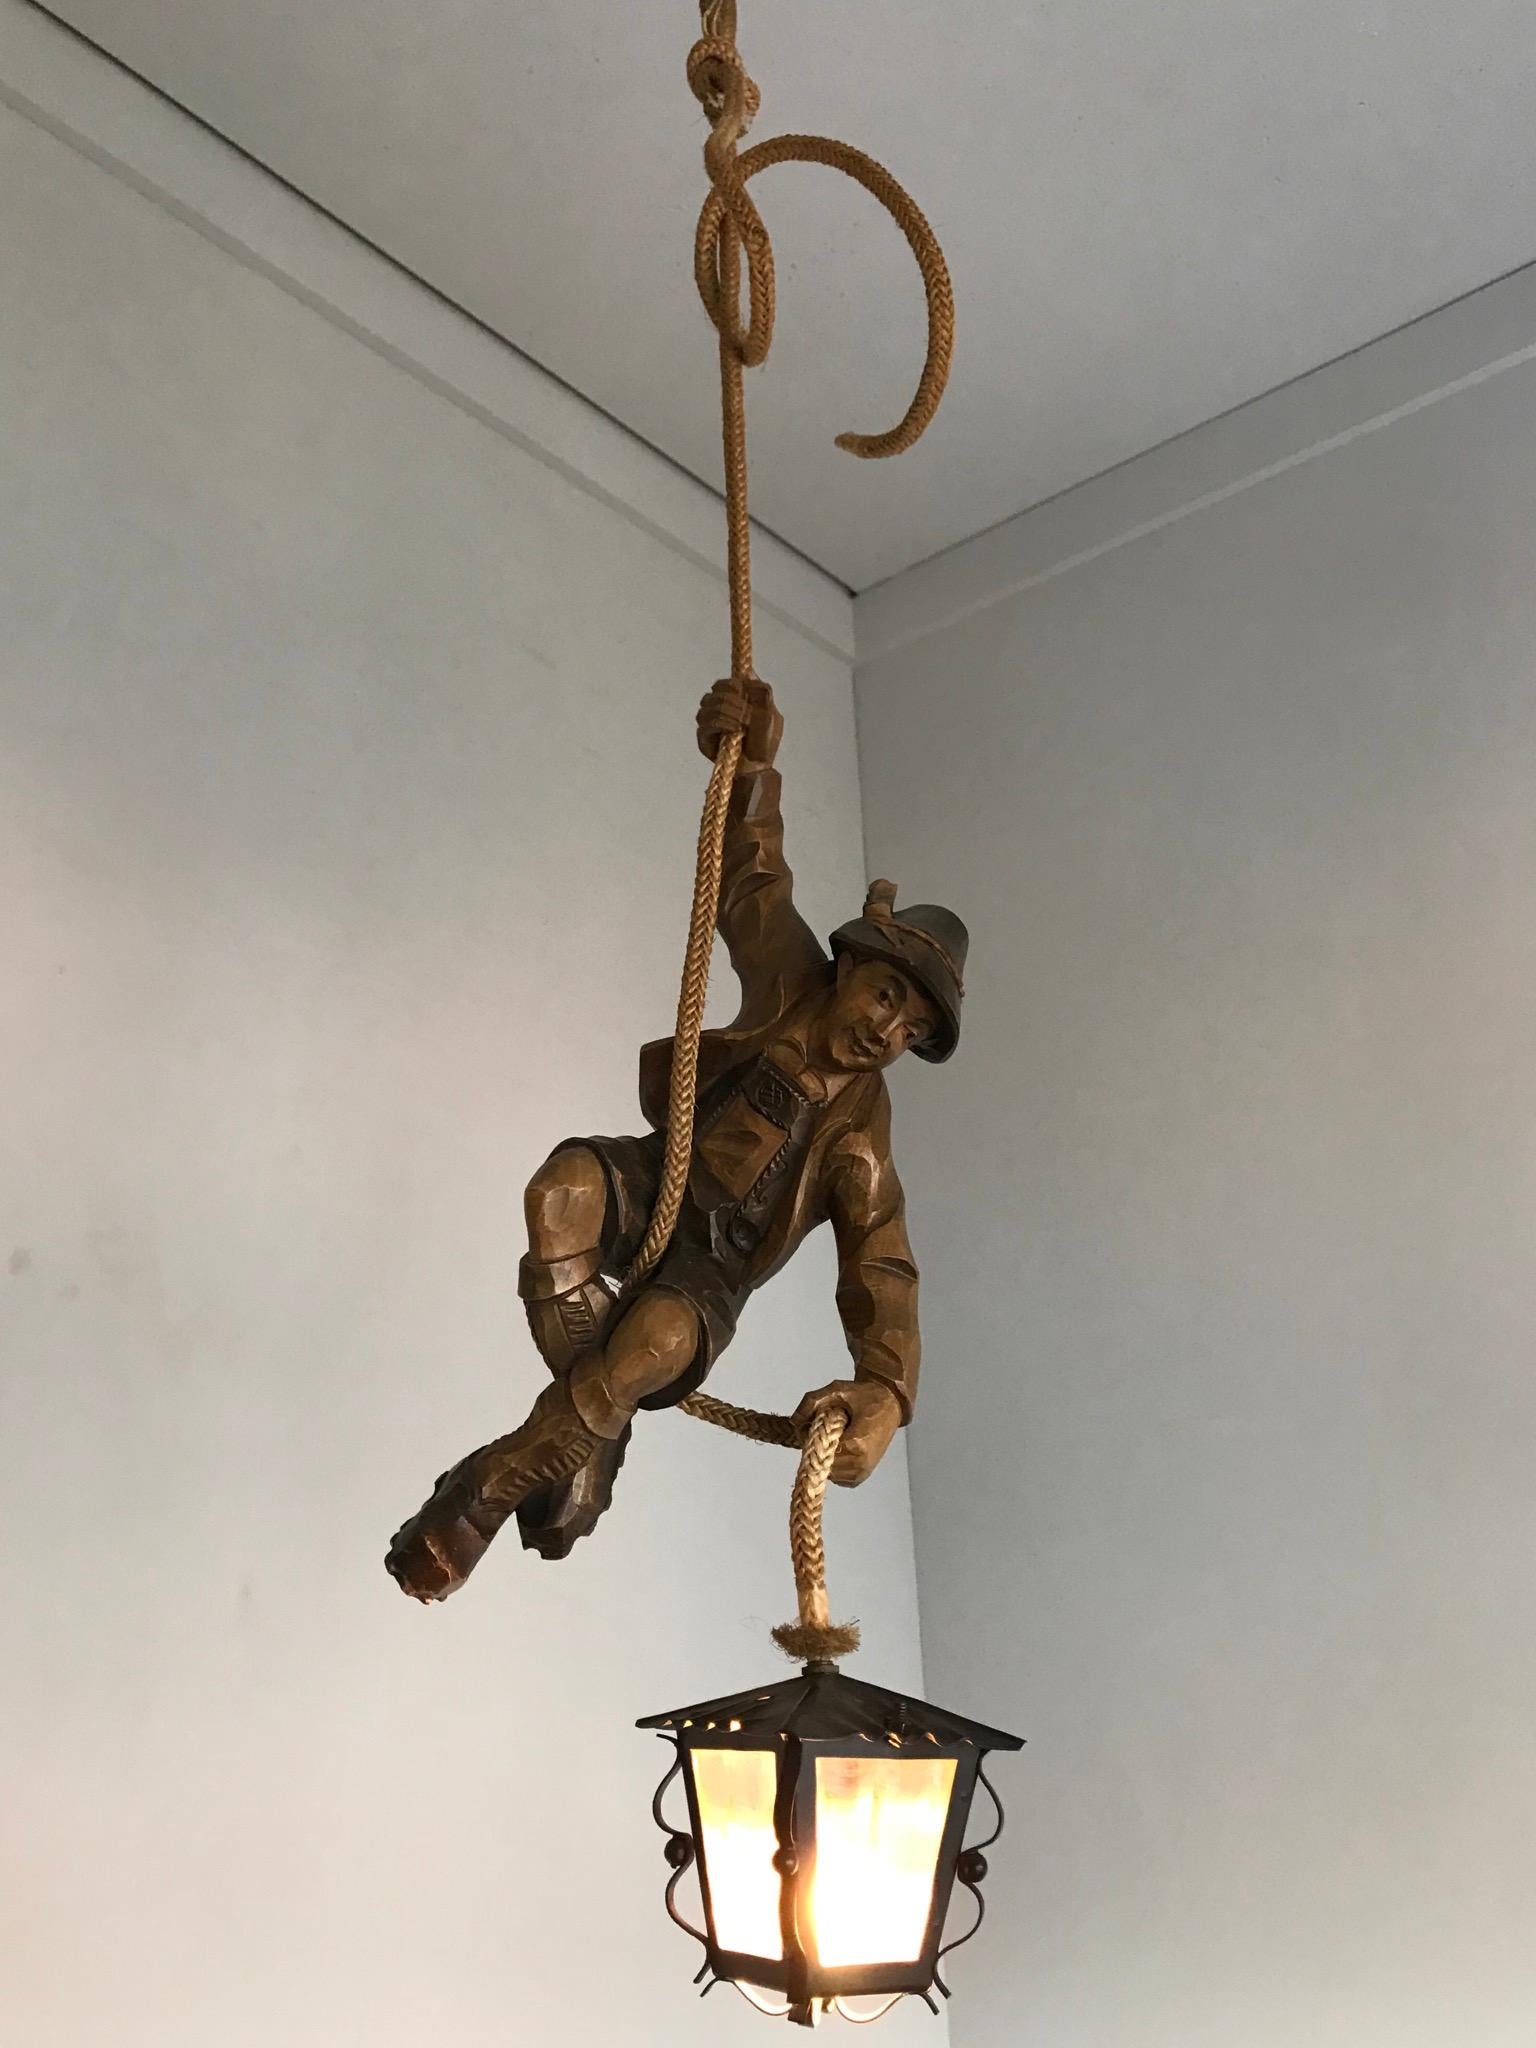 Rare and beautifully crafted light fixture for Black Forest and mountaineer enthousiasts.

This fine quality, sculptural light fixture will look great at home, but it can also create the perfect atmosphere in a hunting lodge, a man cave, a tavern or